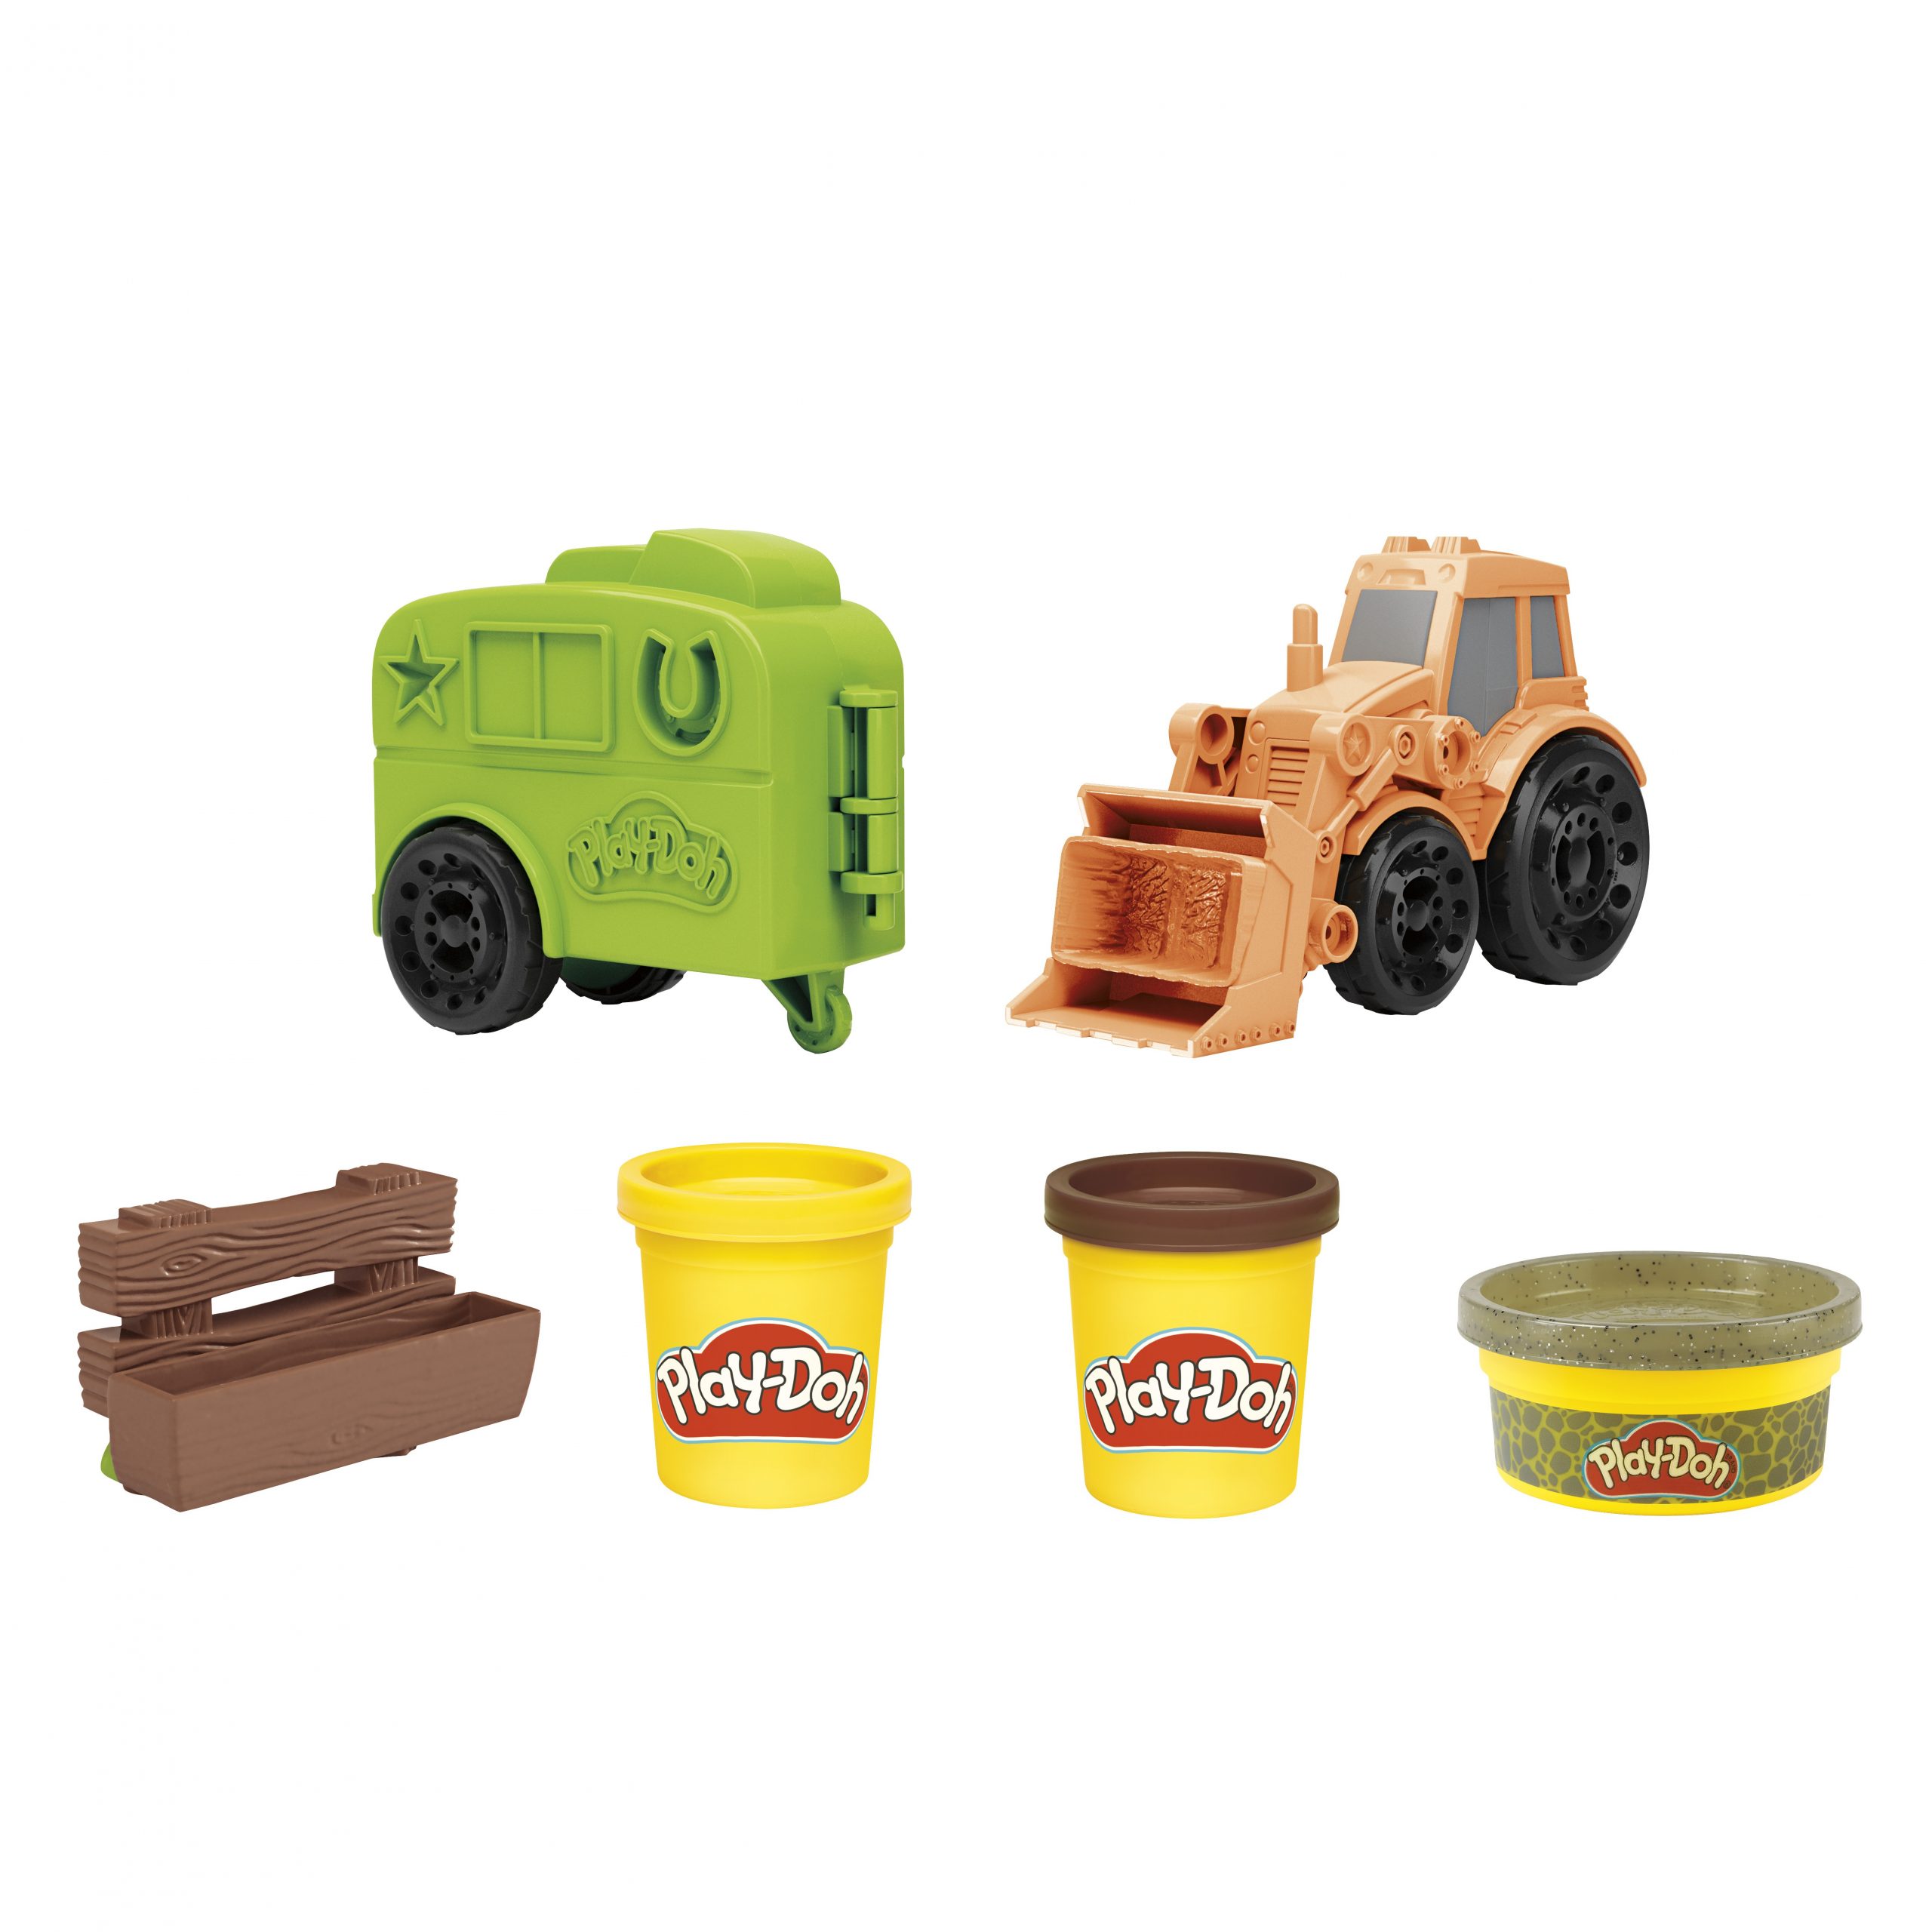 Play-doh Tractor F1012 - Play-Doh